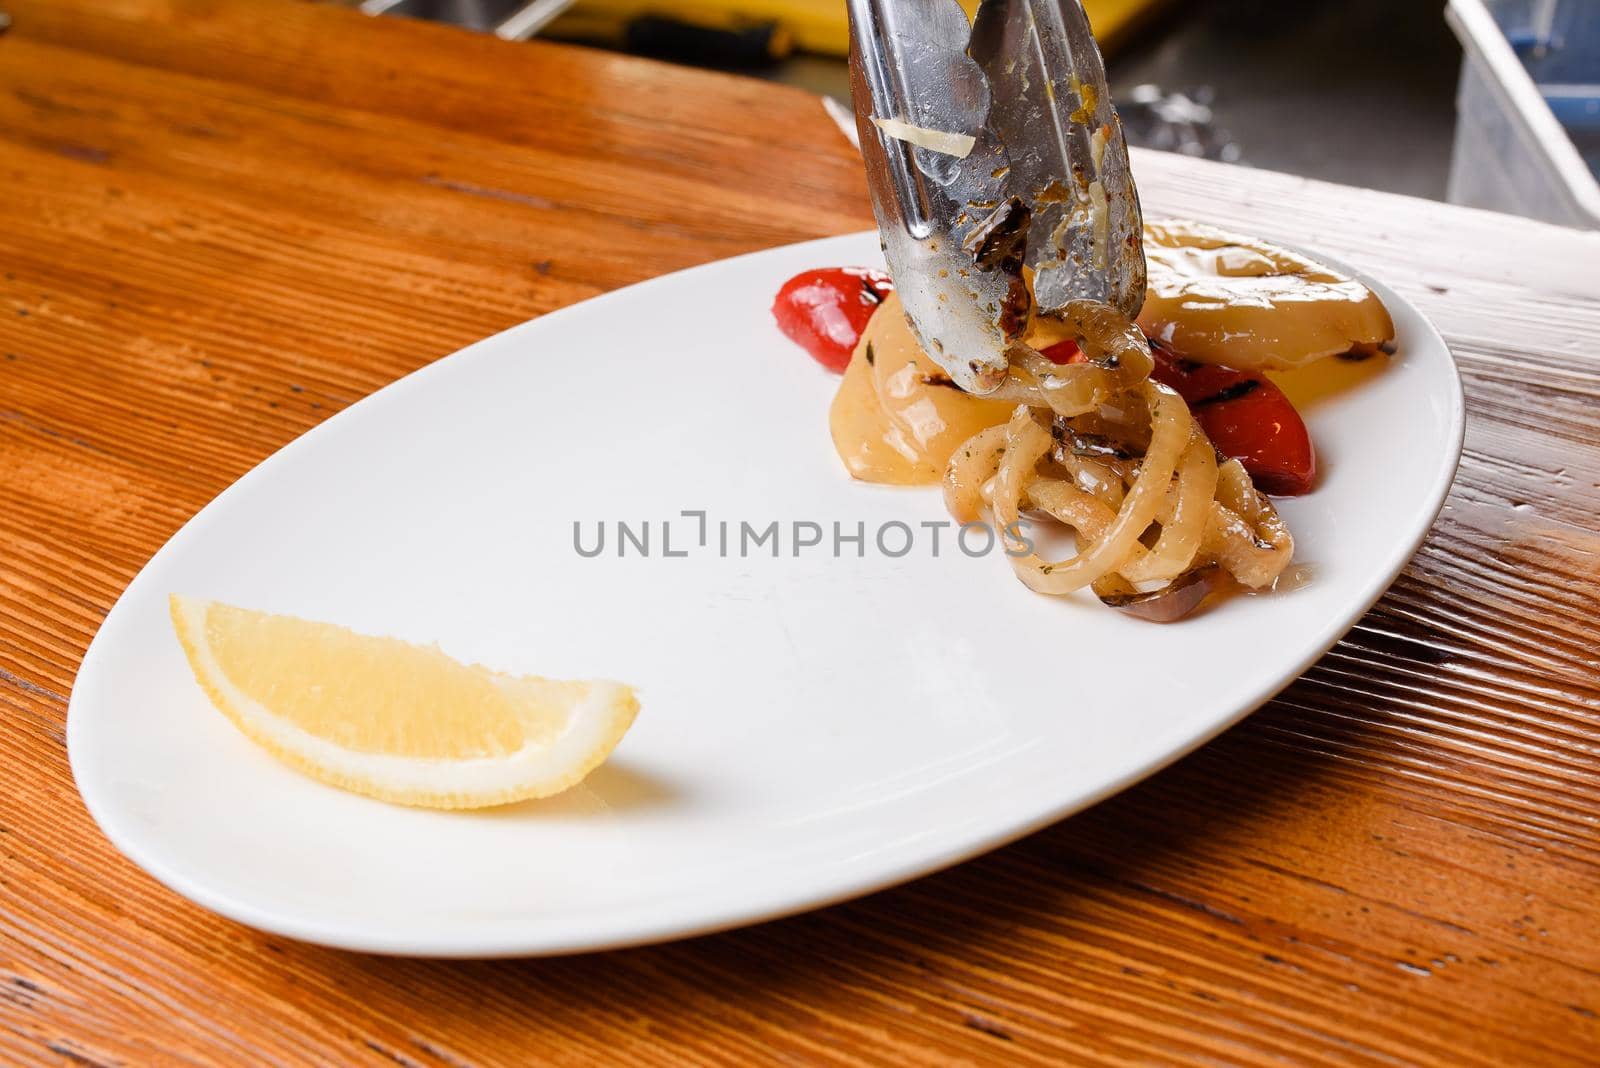 Grilled pepper and onion with lemon on a white plate on a wooden table. Serving the dish with metal tongs by Rabizo